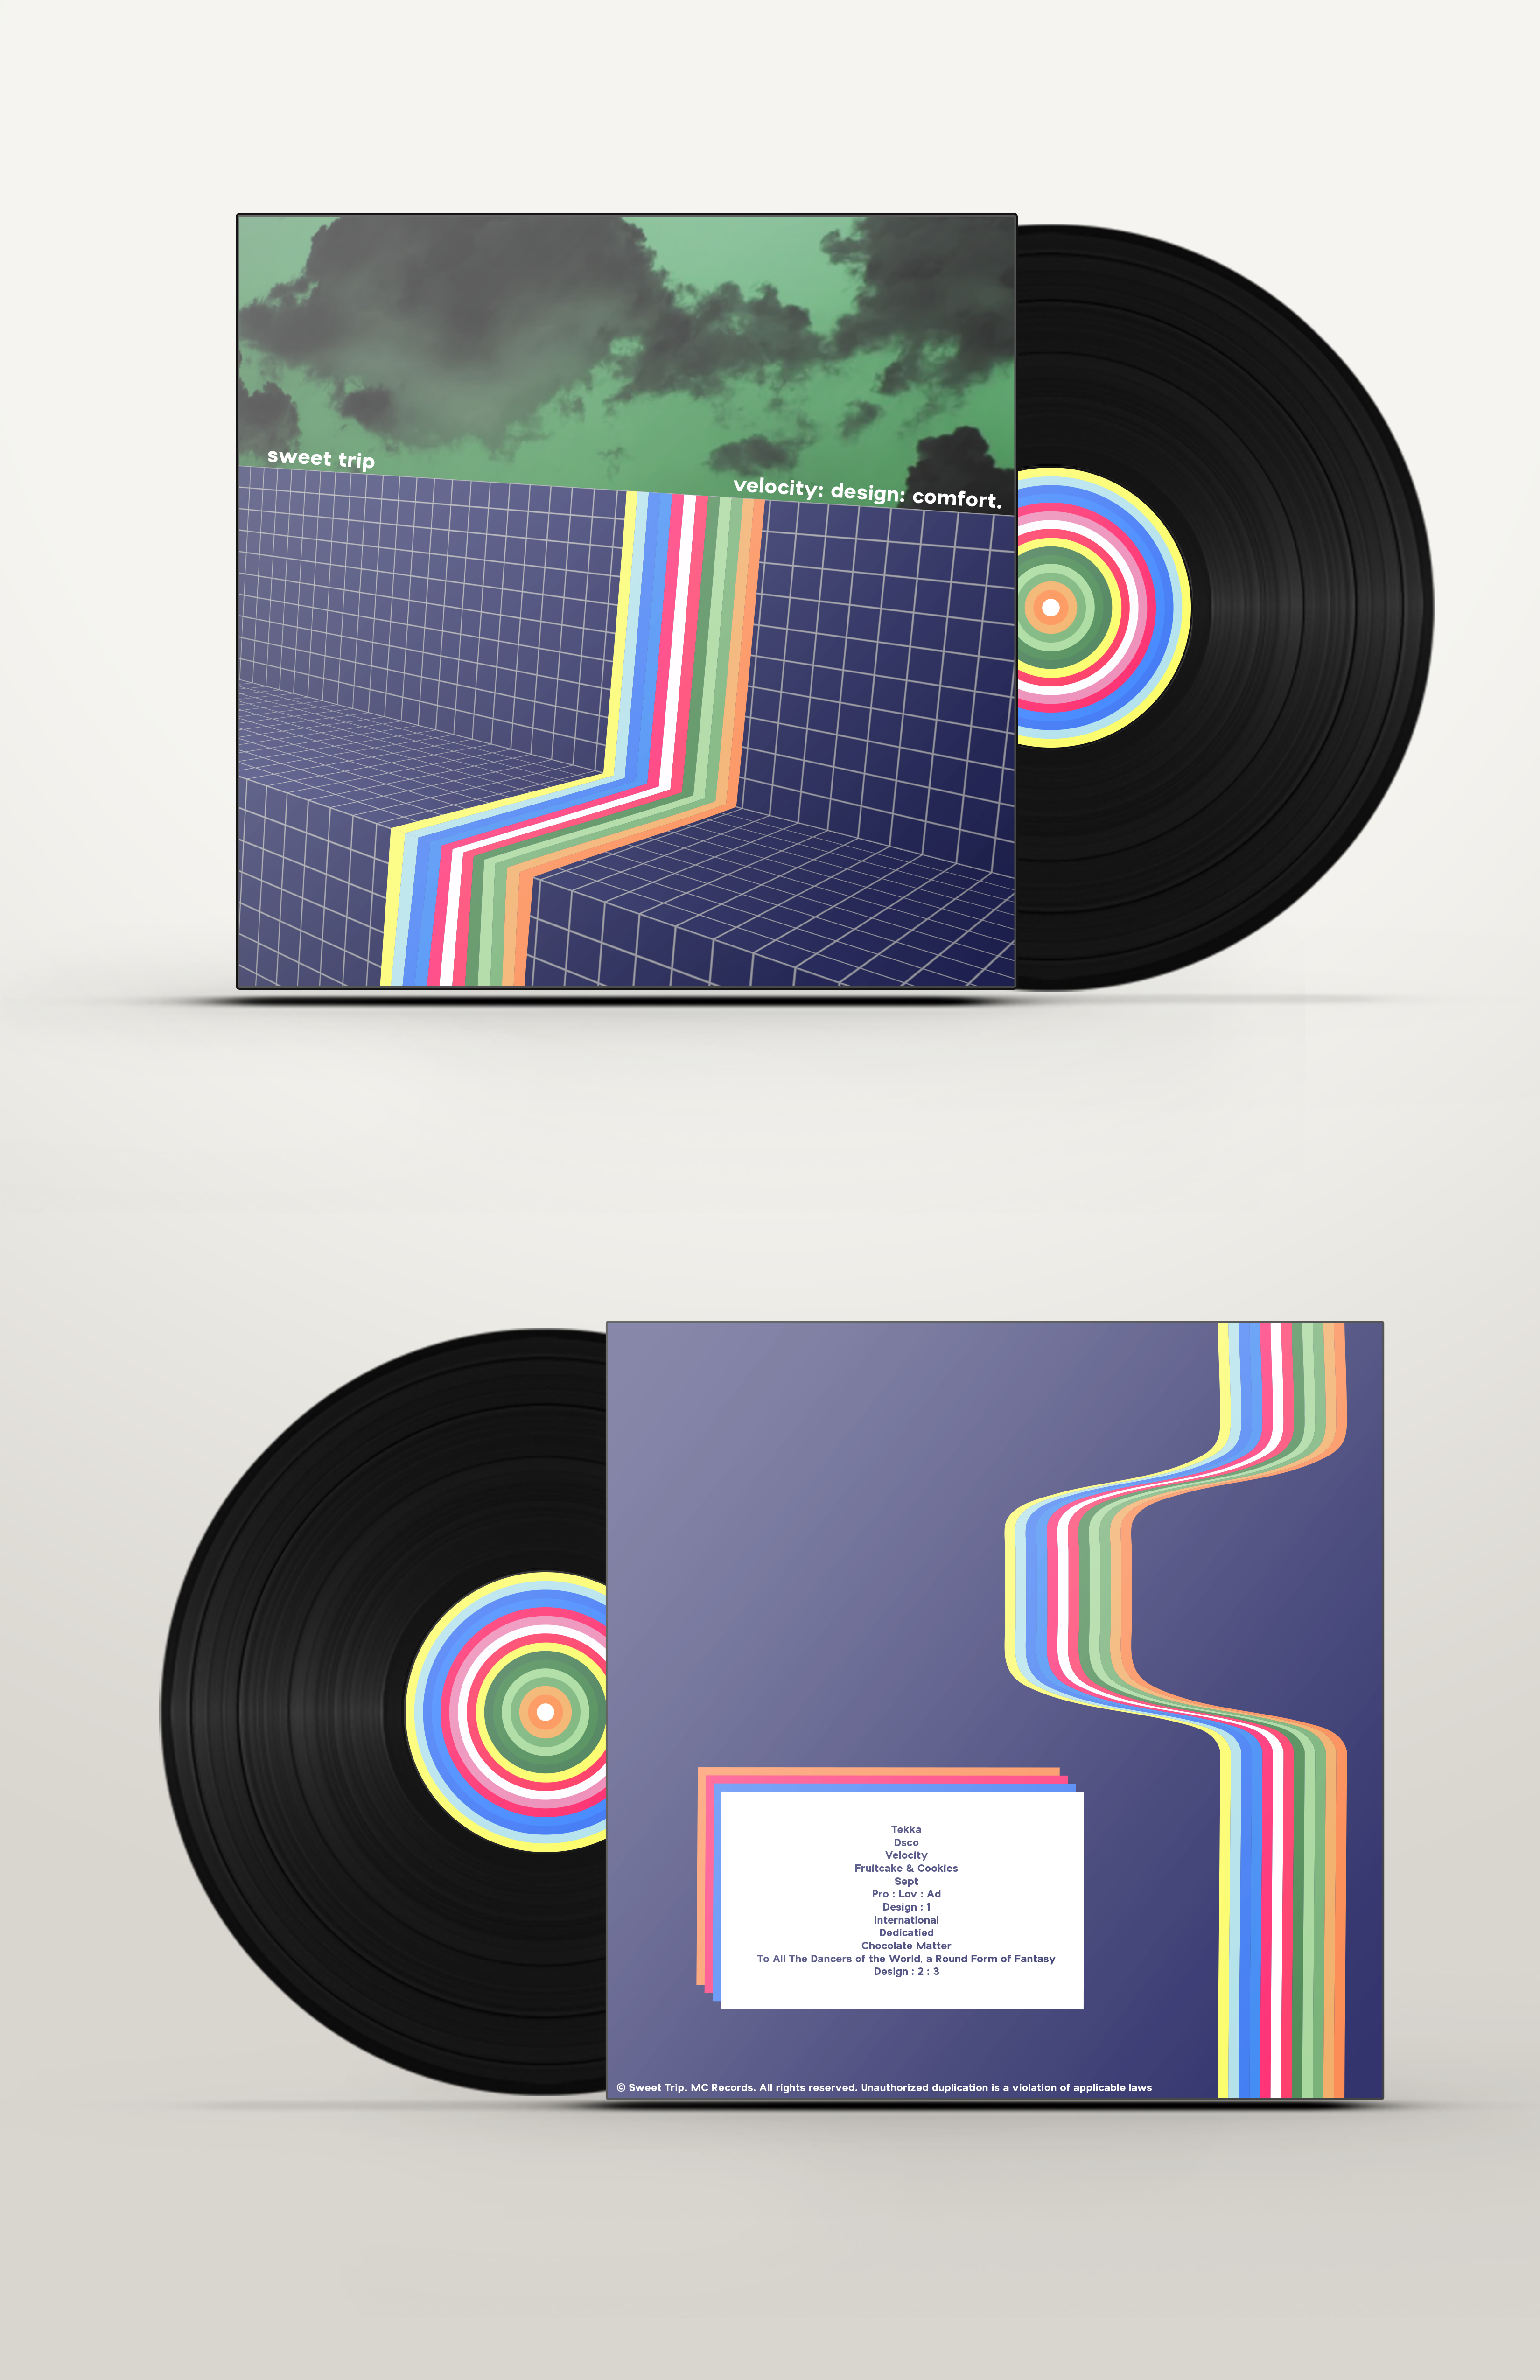 A mockup of all the designs I made. It depicts a record coming out of the sleeve, and shows both the front and back cover. The insert of the record can also be seen, which is formed by several concentric circles that are the same colors as the ribbon of color on the front and back.